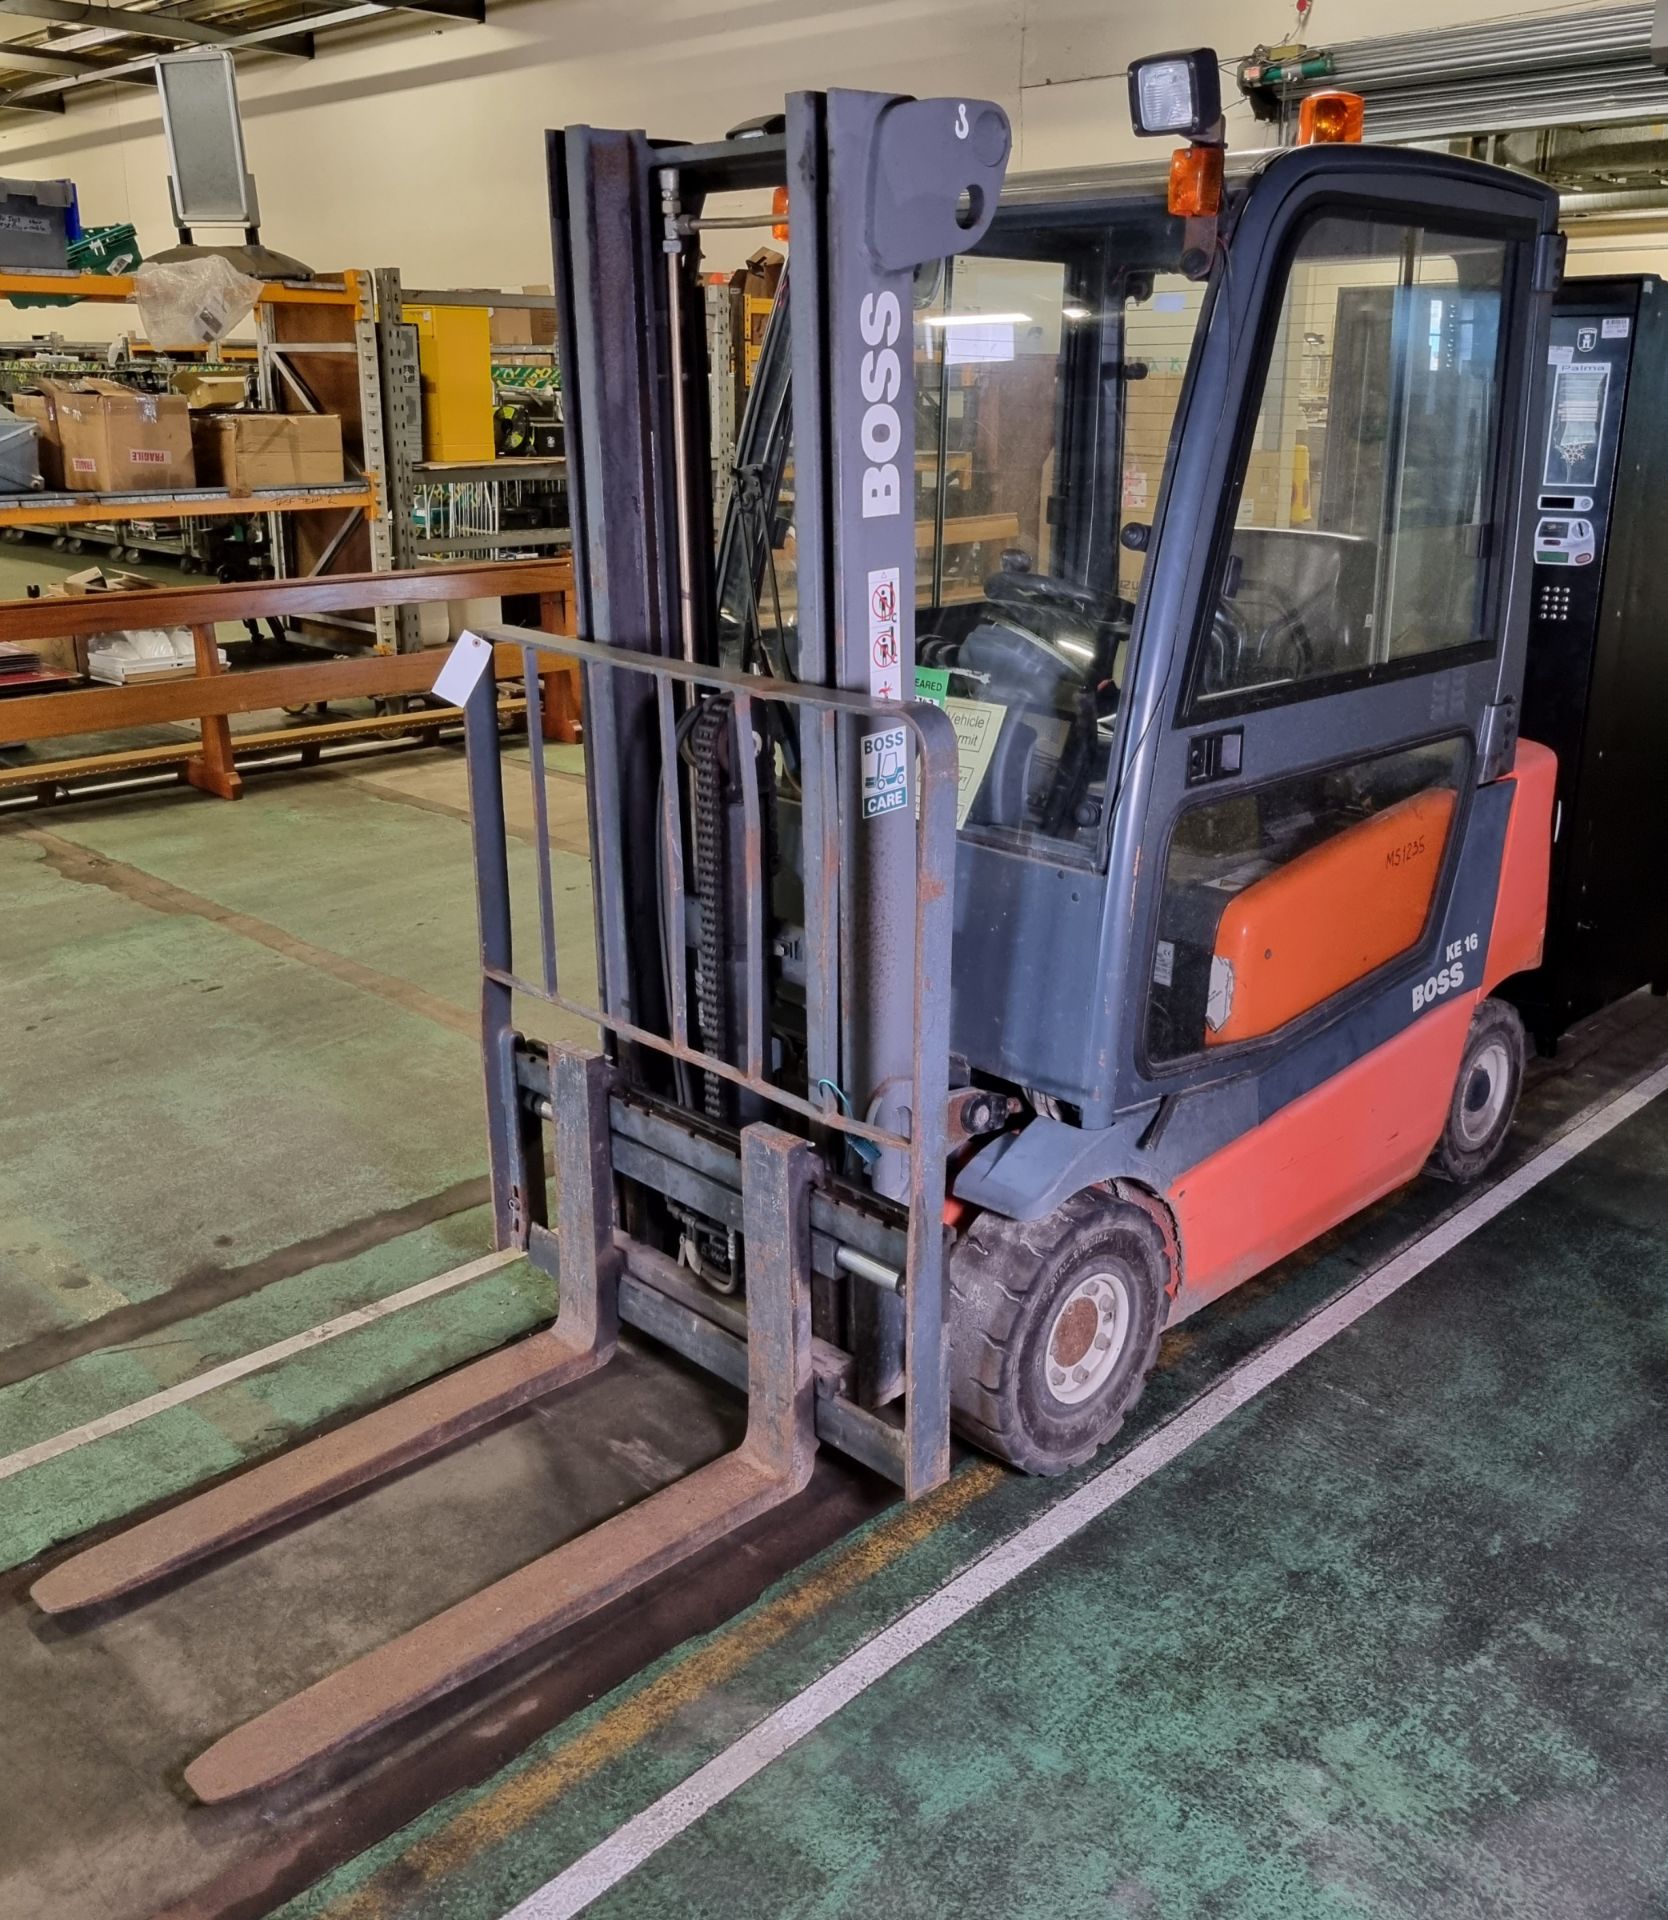 Steinbock Boss KE16 4 wheel electric forklift - L 2750 x W 1000 x H 2000mm - NEEDS NEW BATTERY - Image 4 of 24